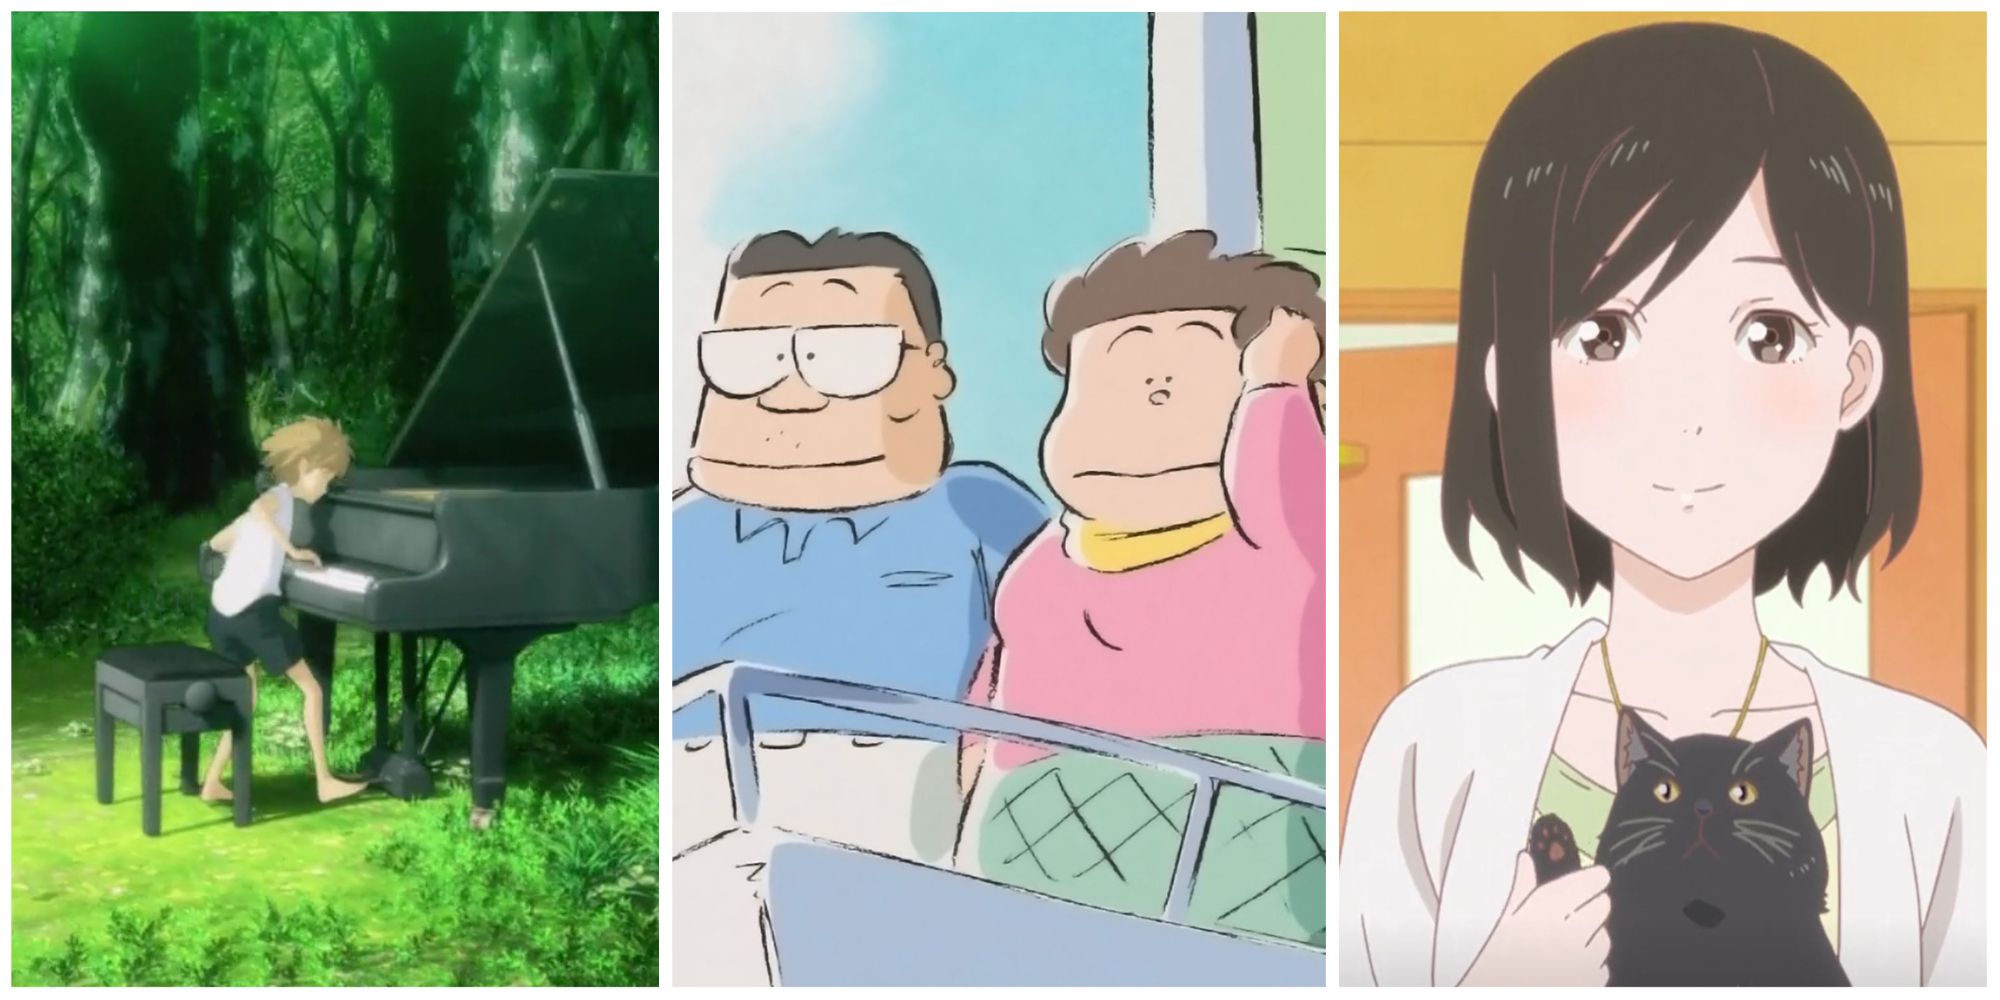 A split image with the main characters from Piano Forest, My Neighbors the Yamadas, and She and Her Cat: Everything Flows